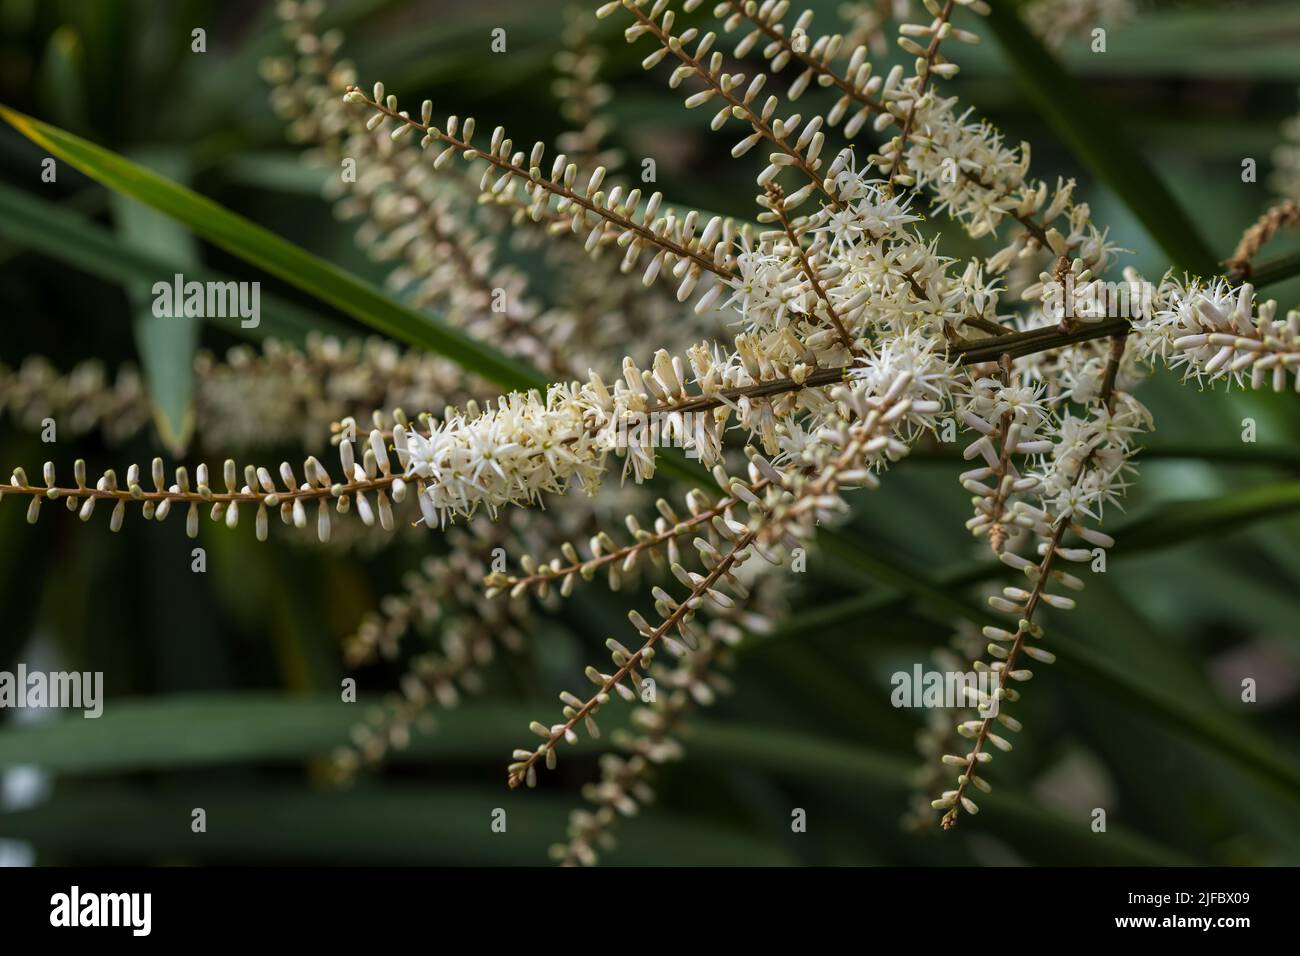 Blooming Cordyline australis, commonly known as cabbage tree or cabbage-palm. White inflorescence with buds of Cordyline australis palm, close up. Spa Stock Photo